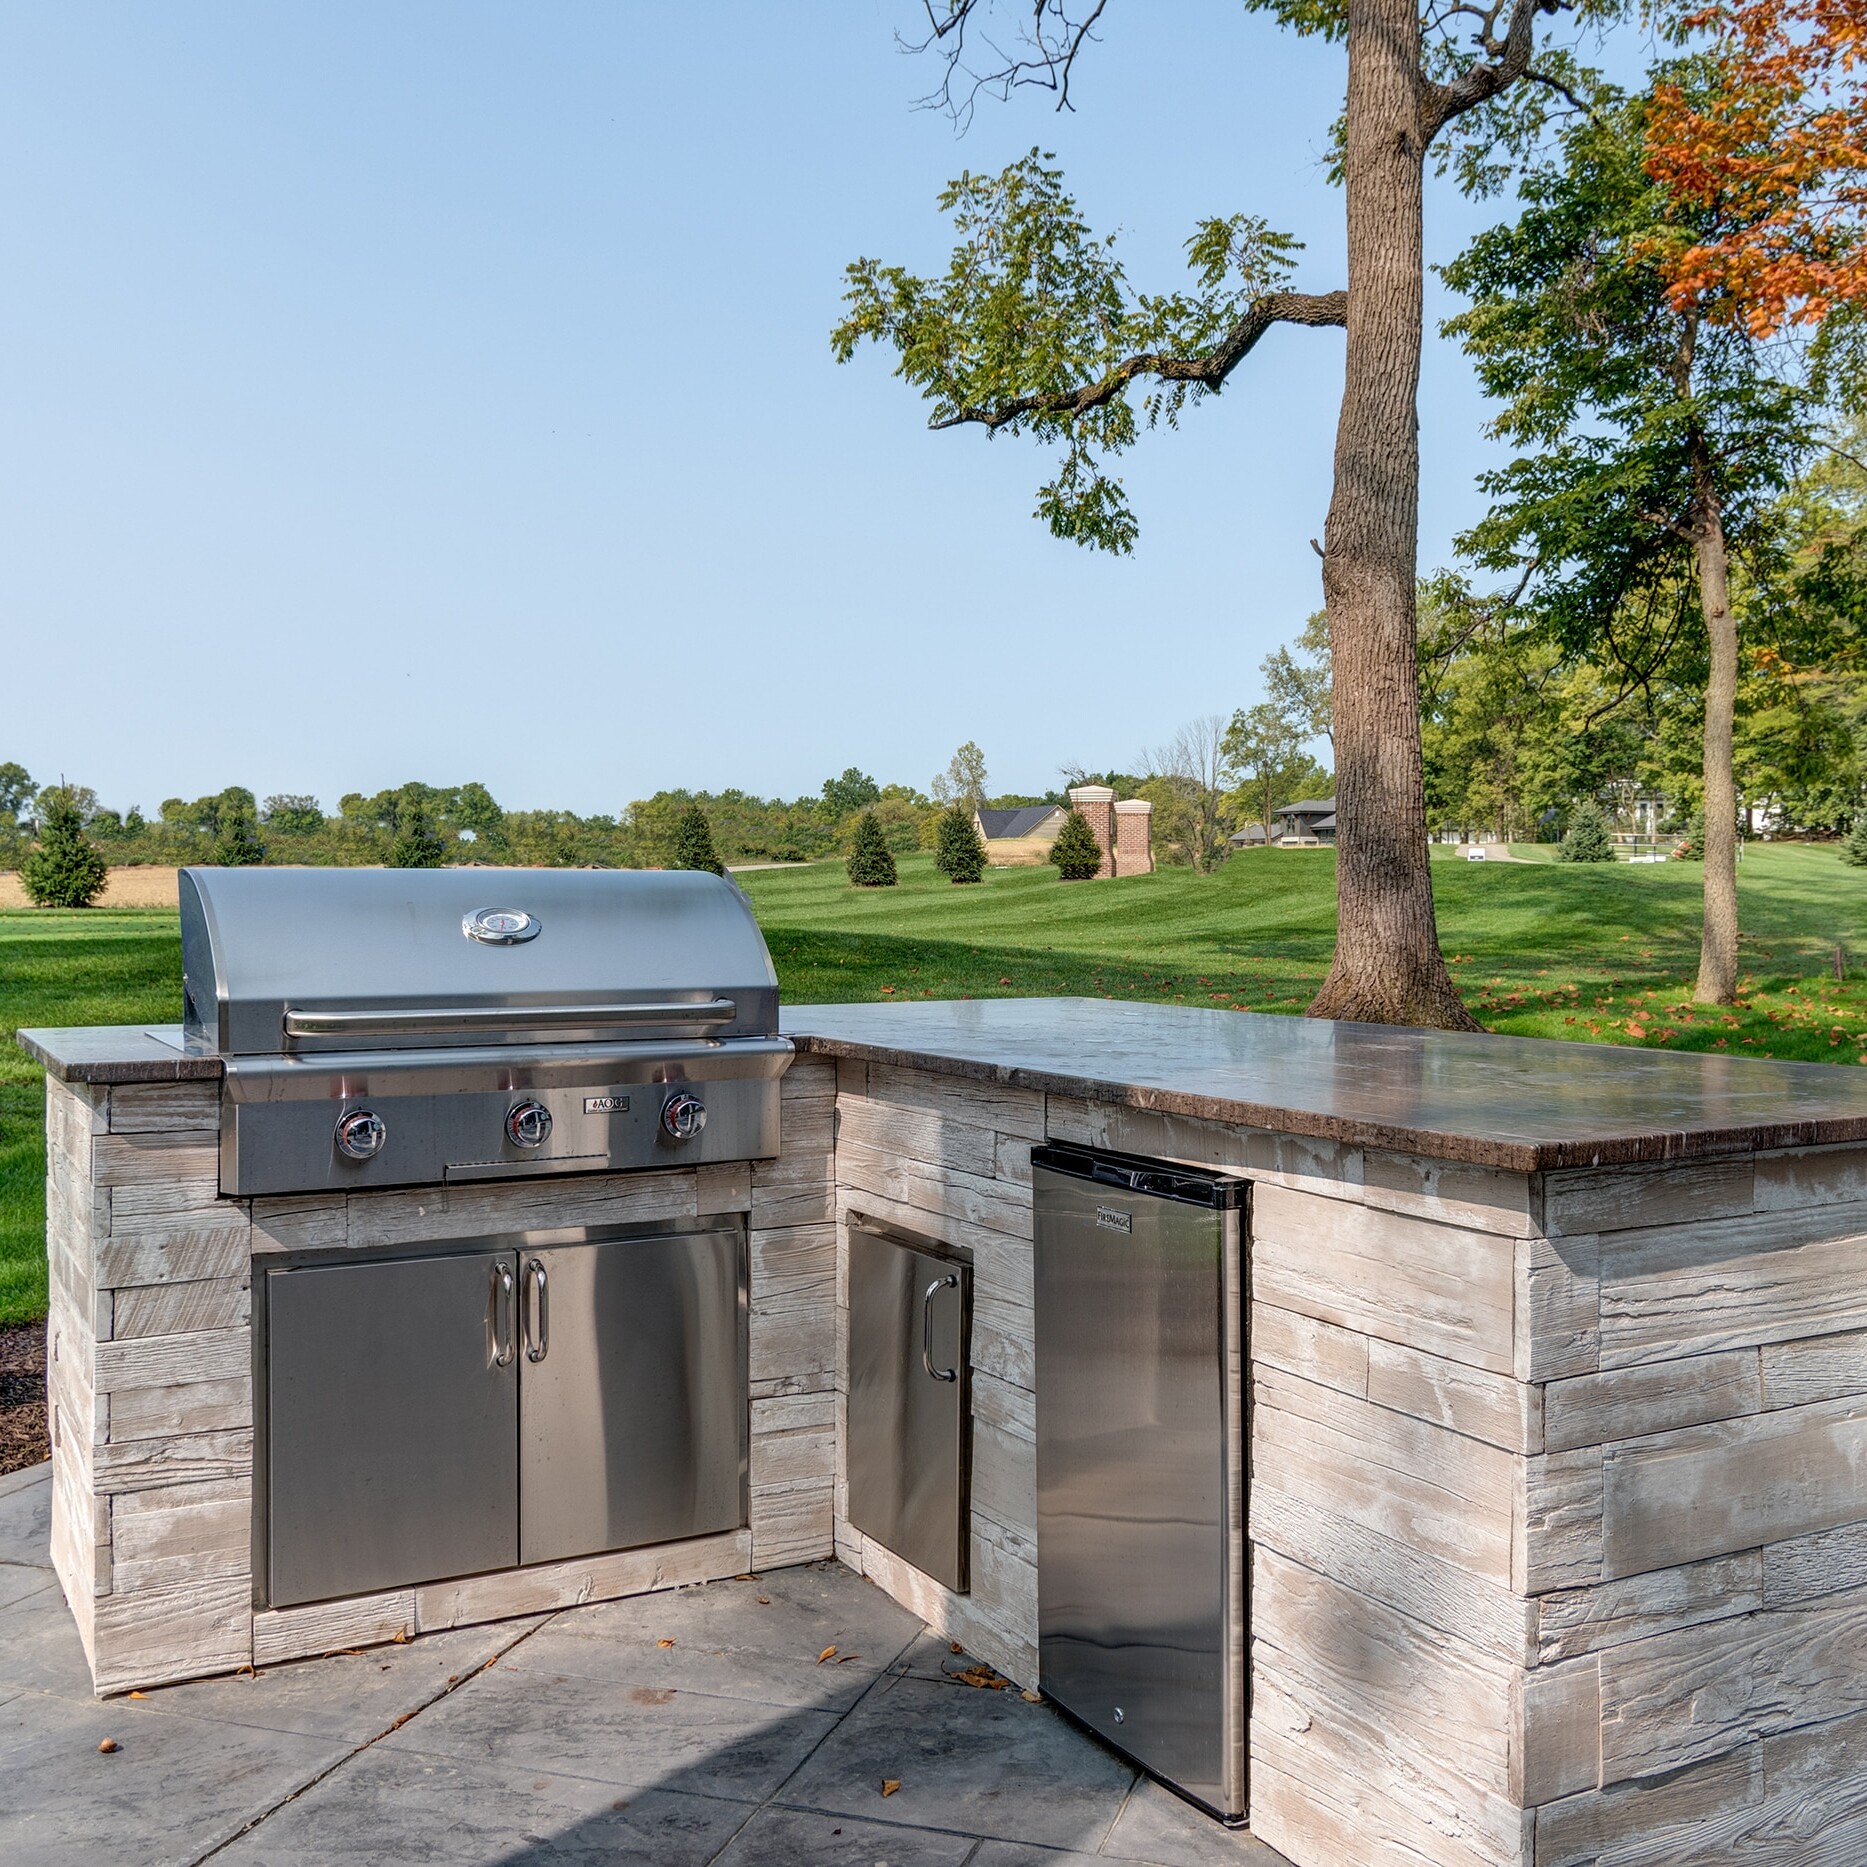 An outdoor kitchen with a grill and sink.